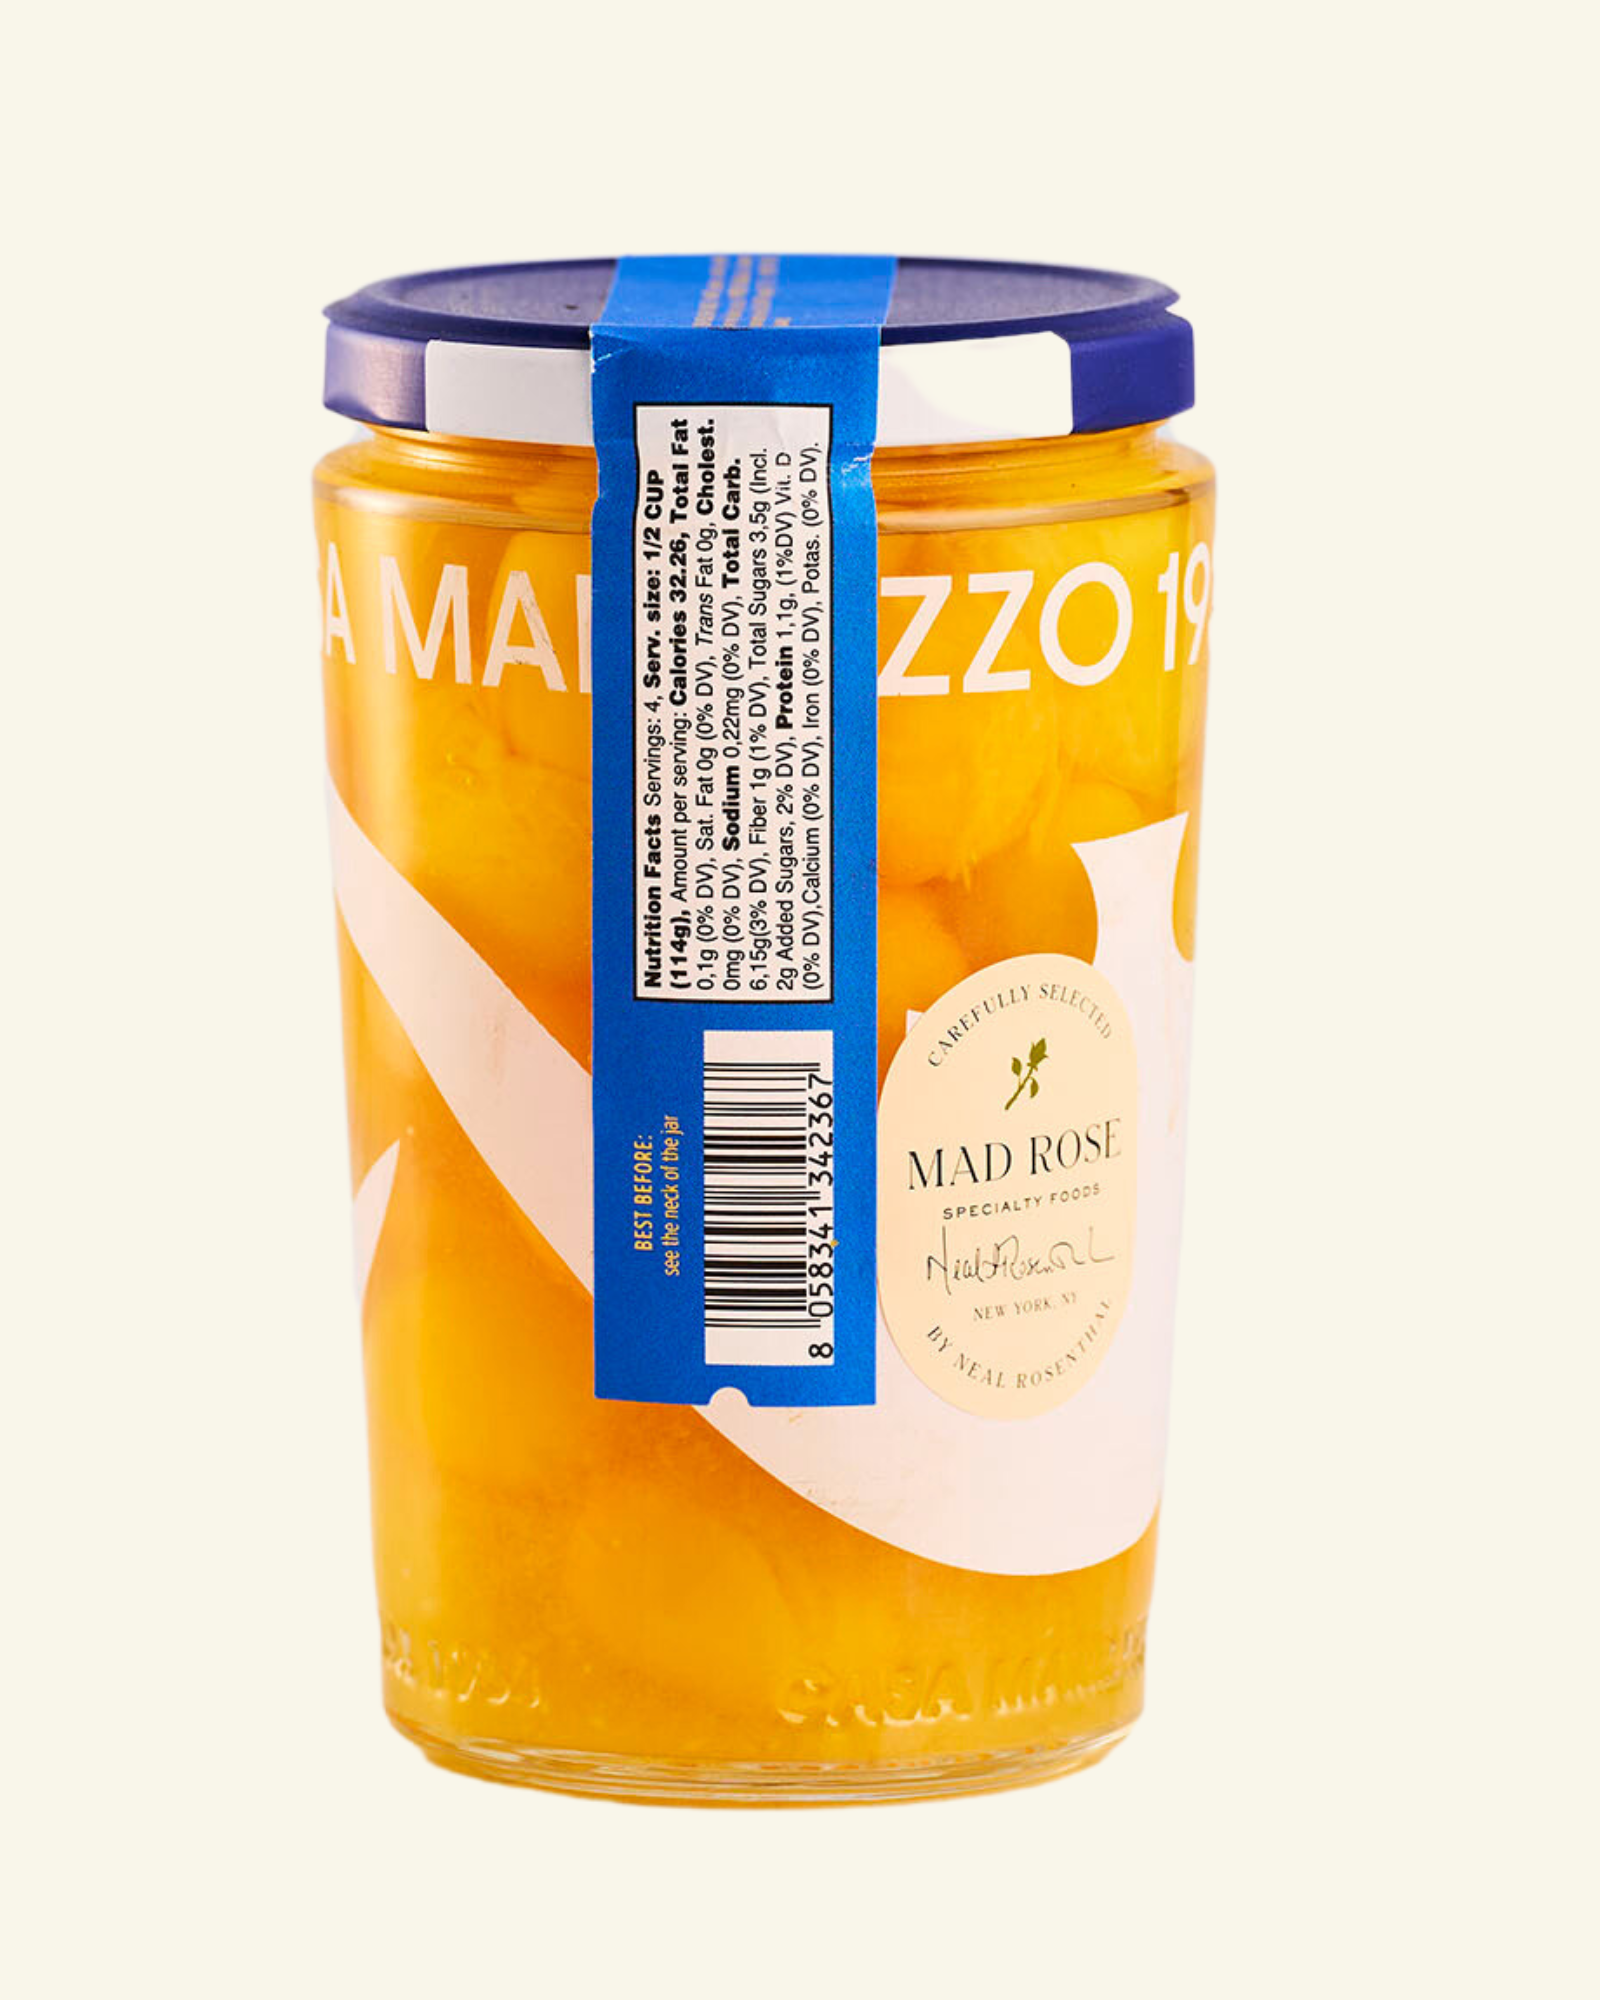  Ercolano Yellow Tomatoes in Brine by Mad Rose Specialty Foods Mad Rose Specialty Foods Perfumarie